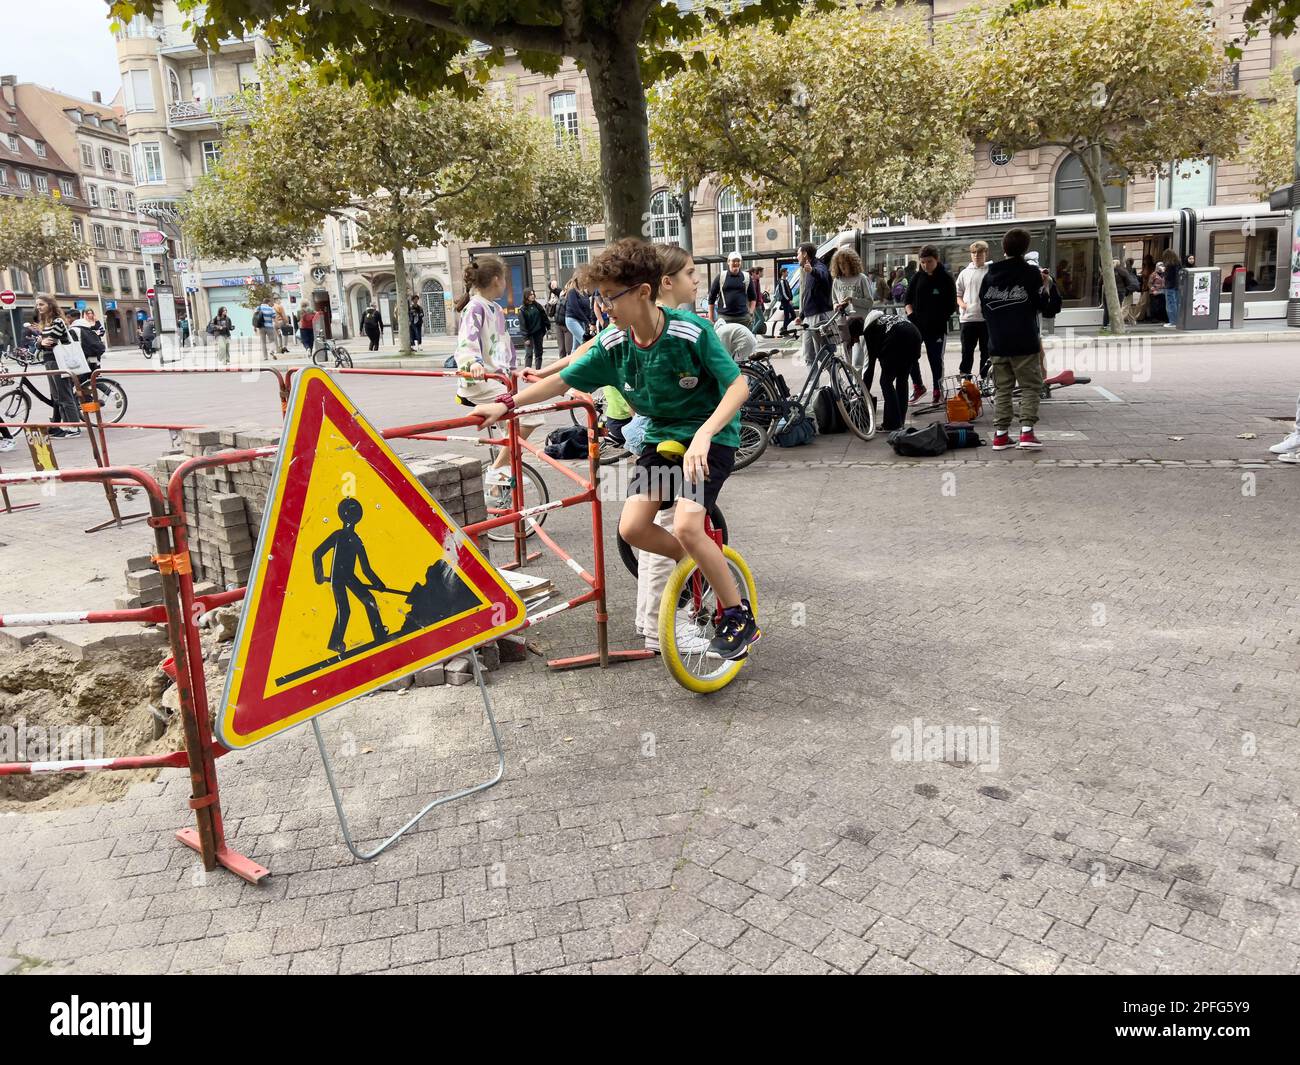 Strasbourg, France - Sep 23, 2022: large group of people gather around a working man fixing bicycles and unicycles on the side of the road. Trees line Stock Photo